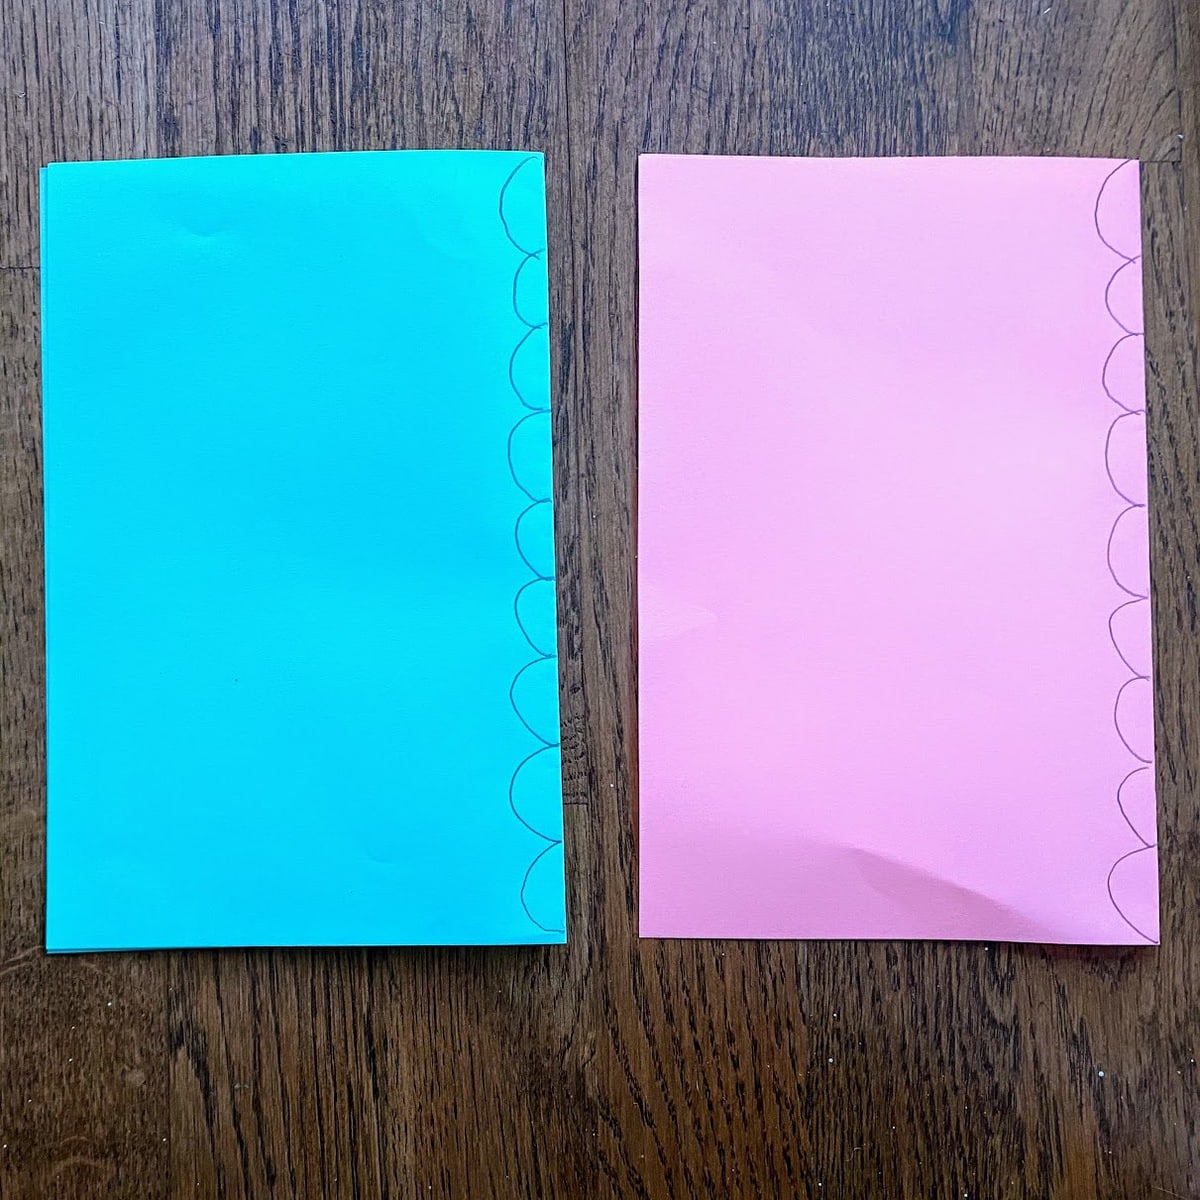 semi circles drawn on folded blue and pink paper